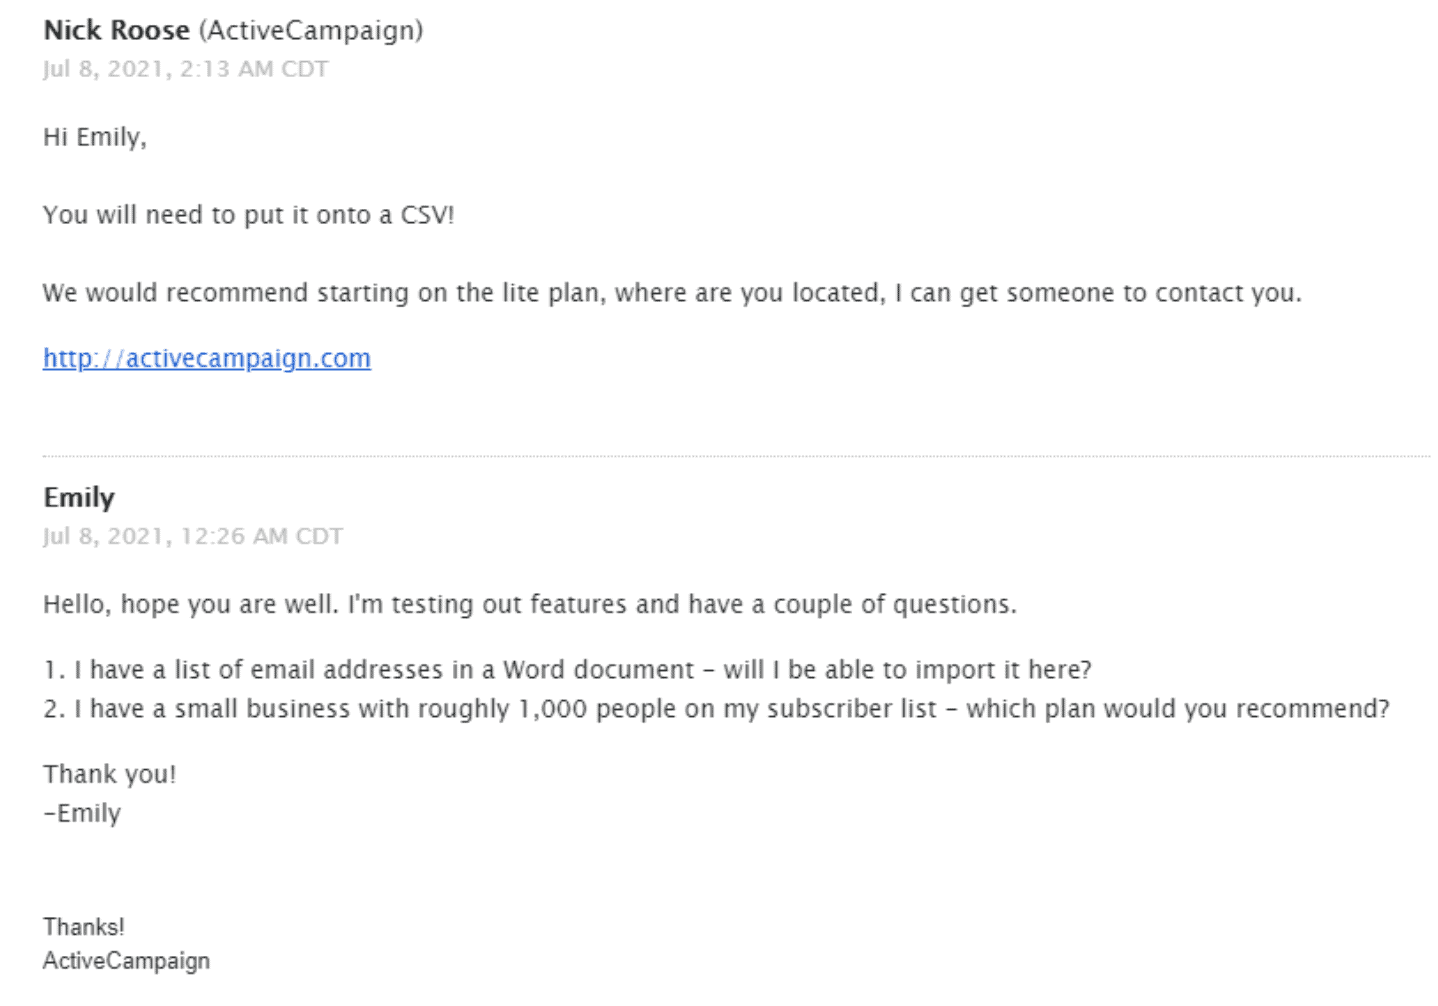 Email from ActiveCampaign tech support.